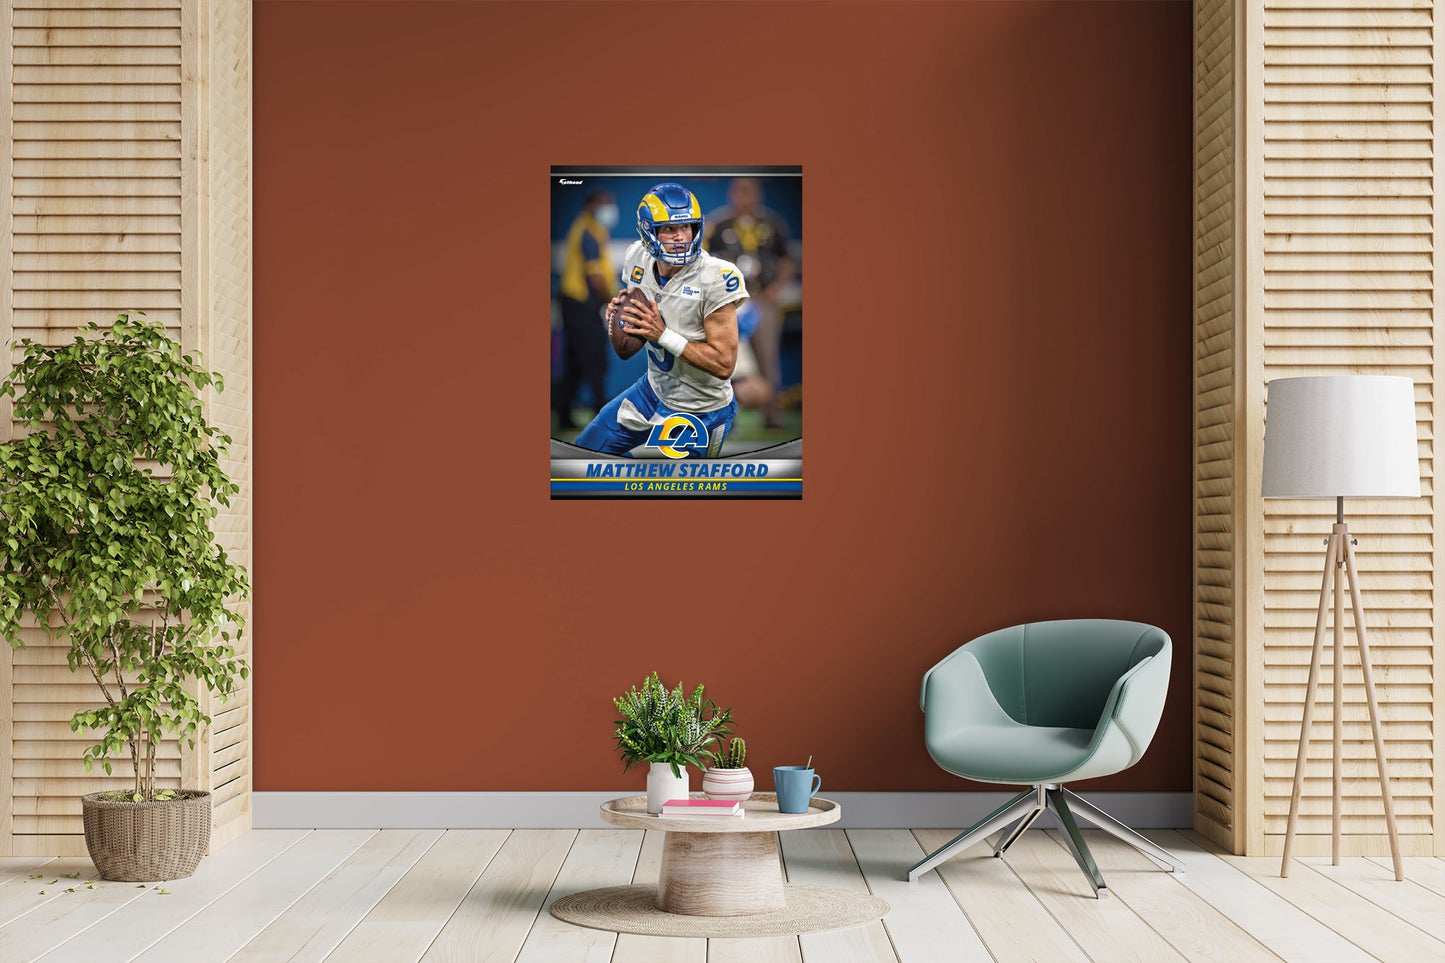 Los Angeles Rams: Matthew Stafford GameStar - Officially Licensed NFL Removable Adhesive Decal